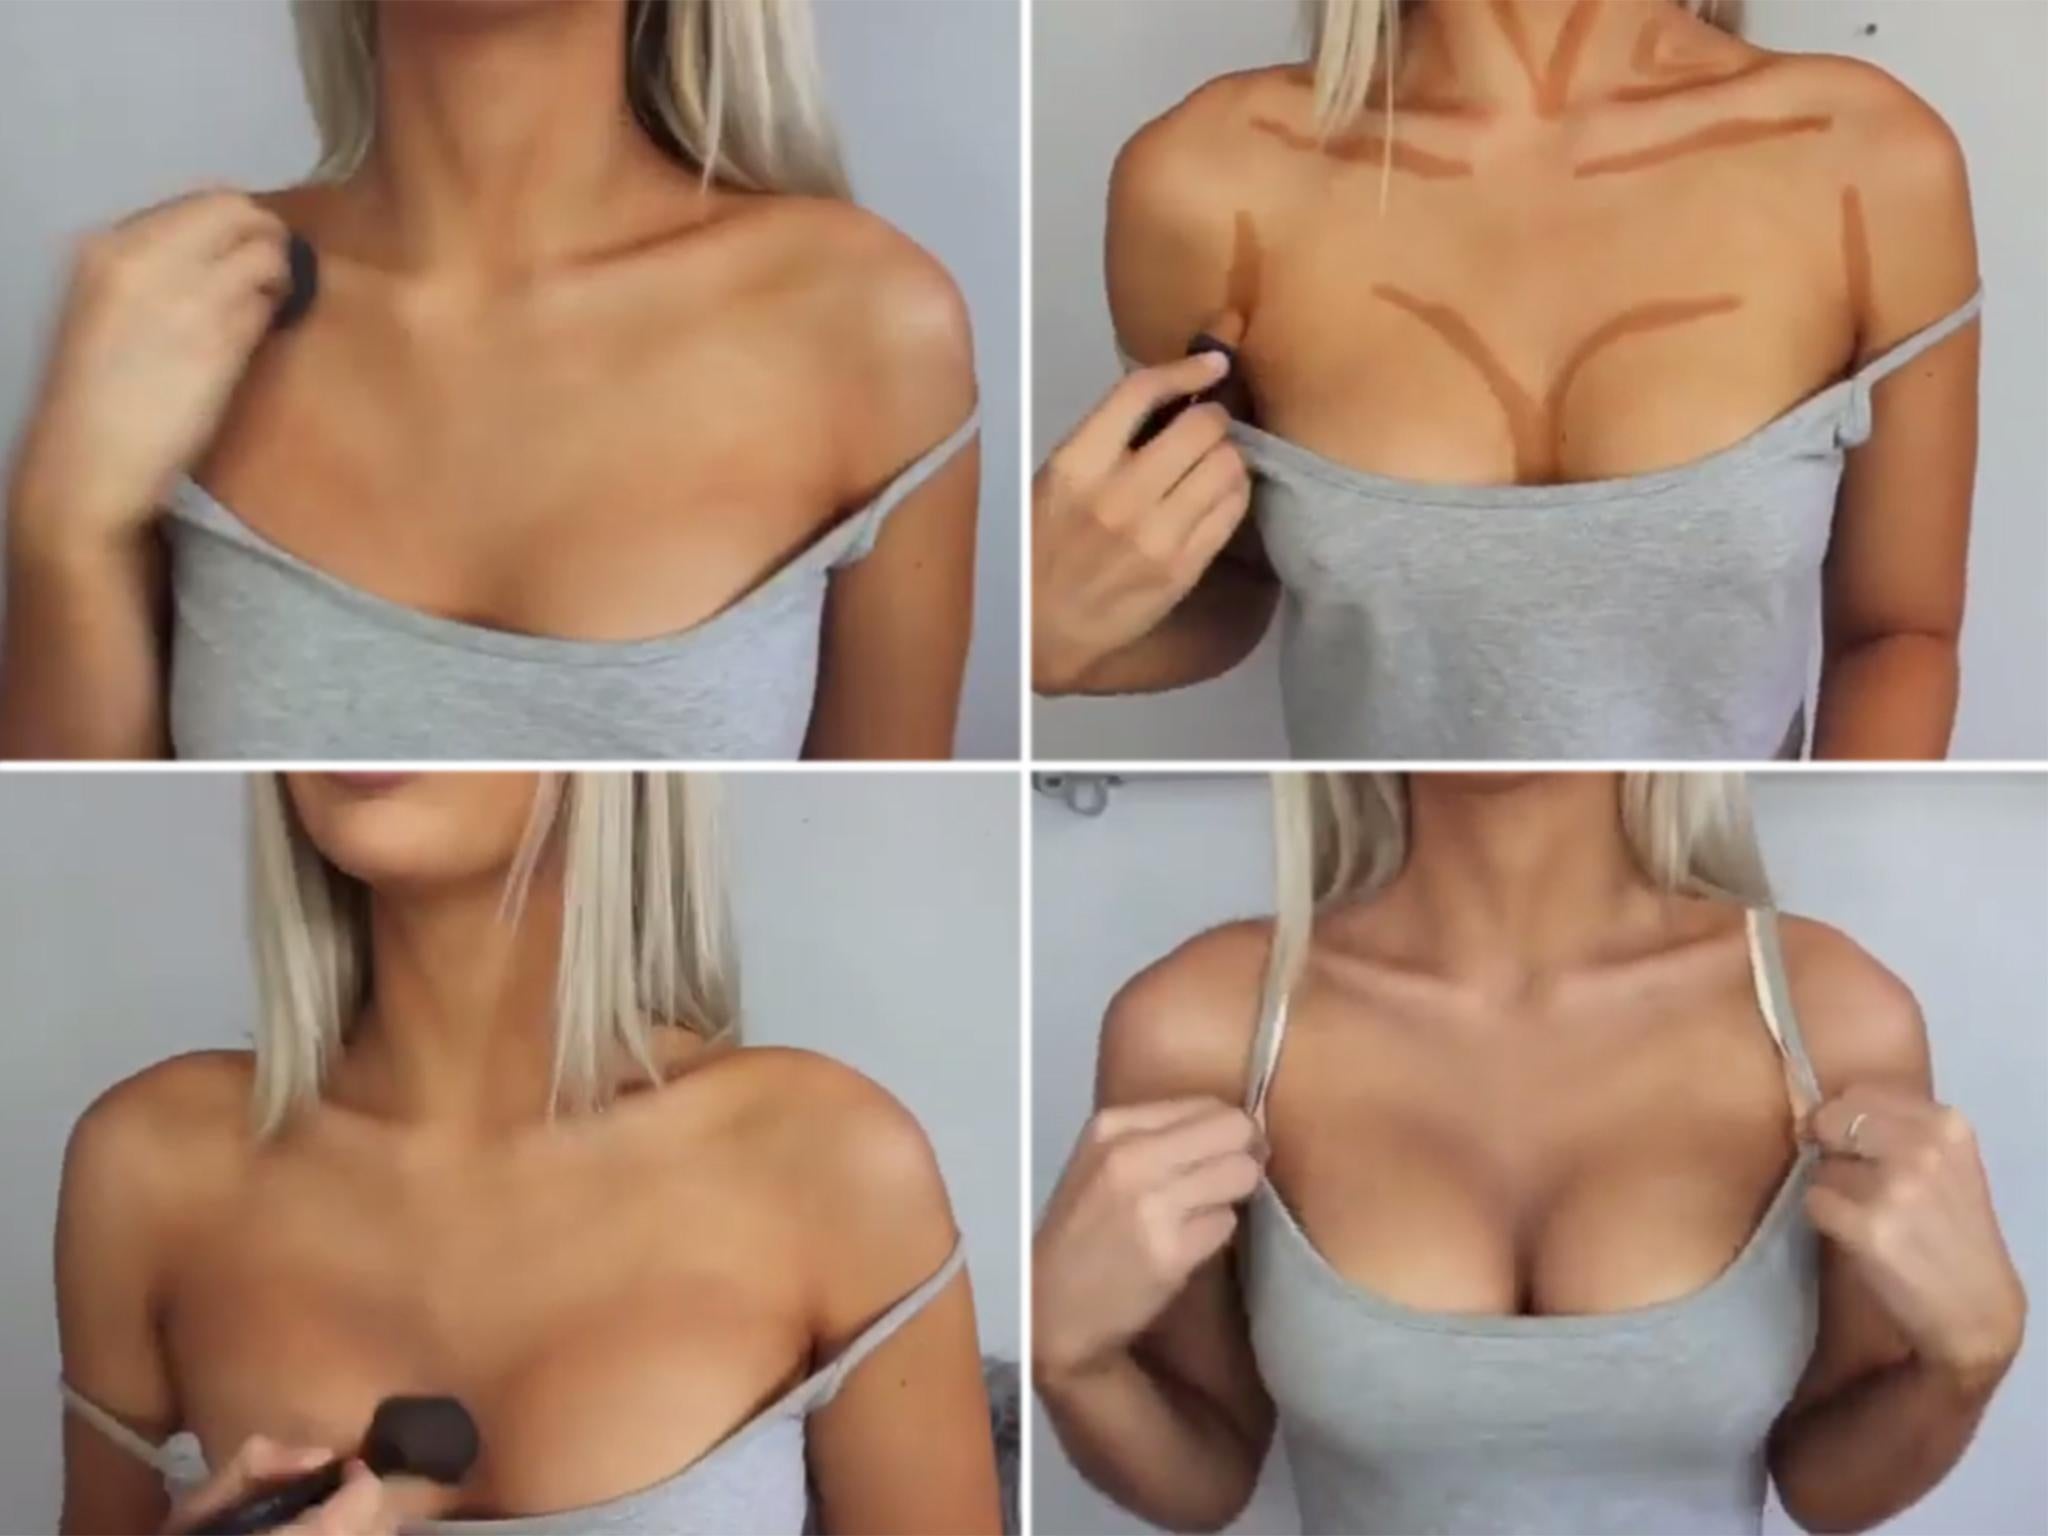 How To Get Bigger Breasts Fast Naturally